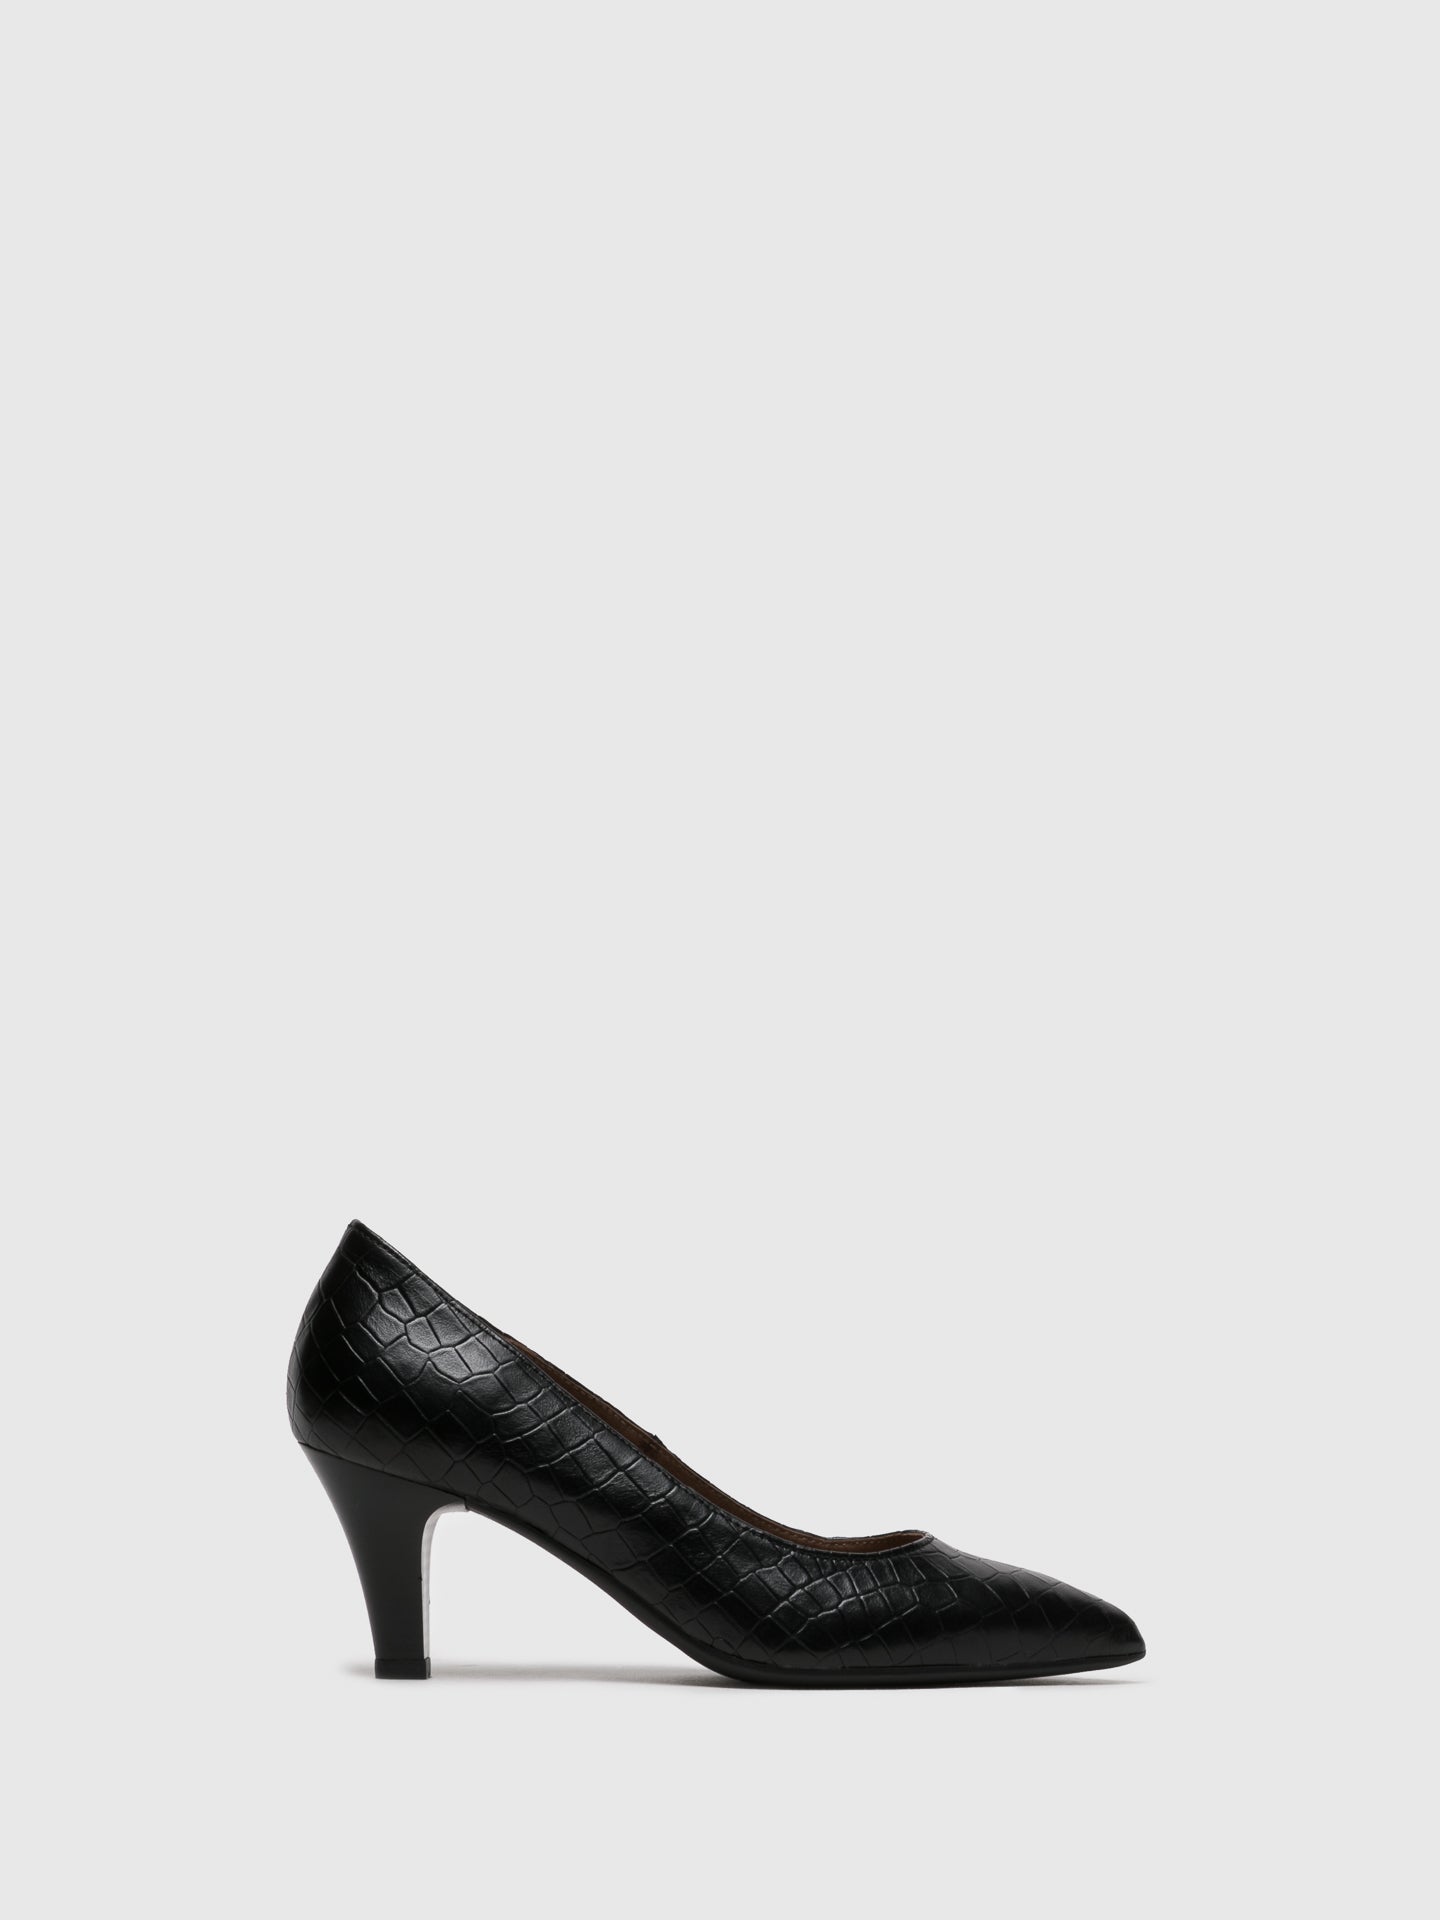 Foreva Black Pointed Toe Pumps